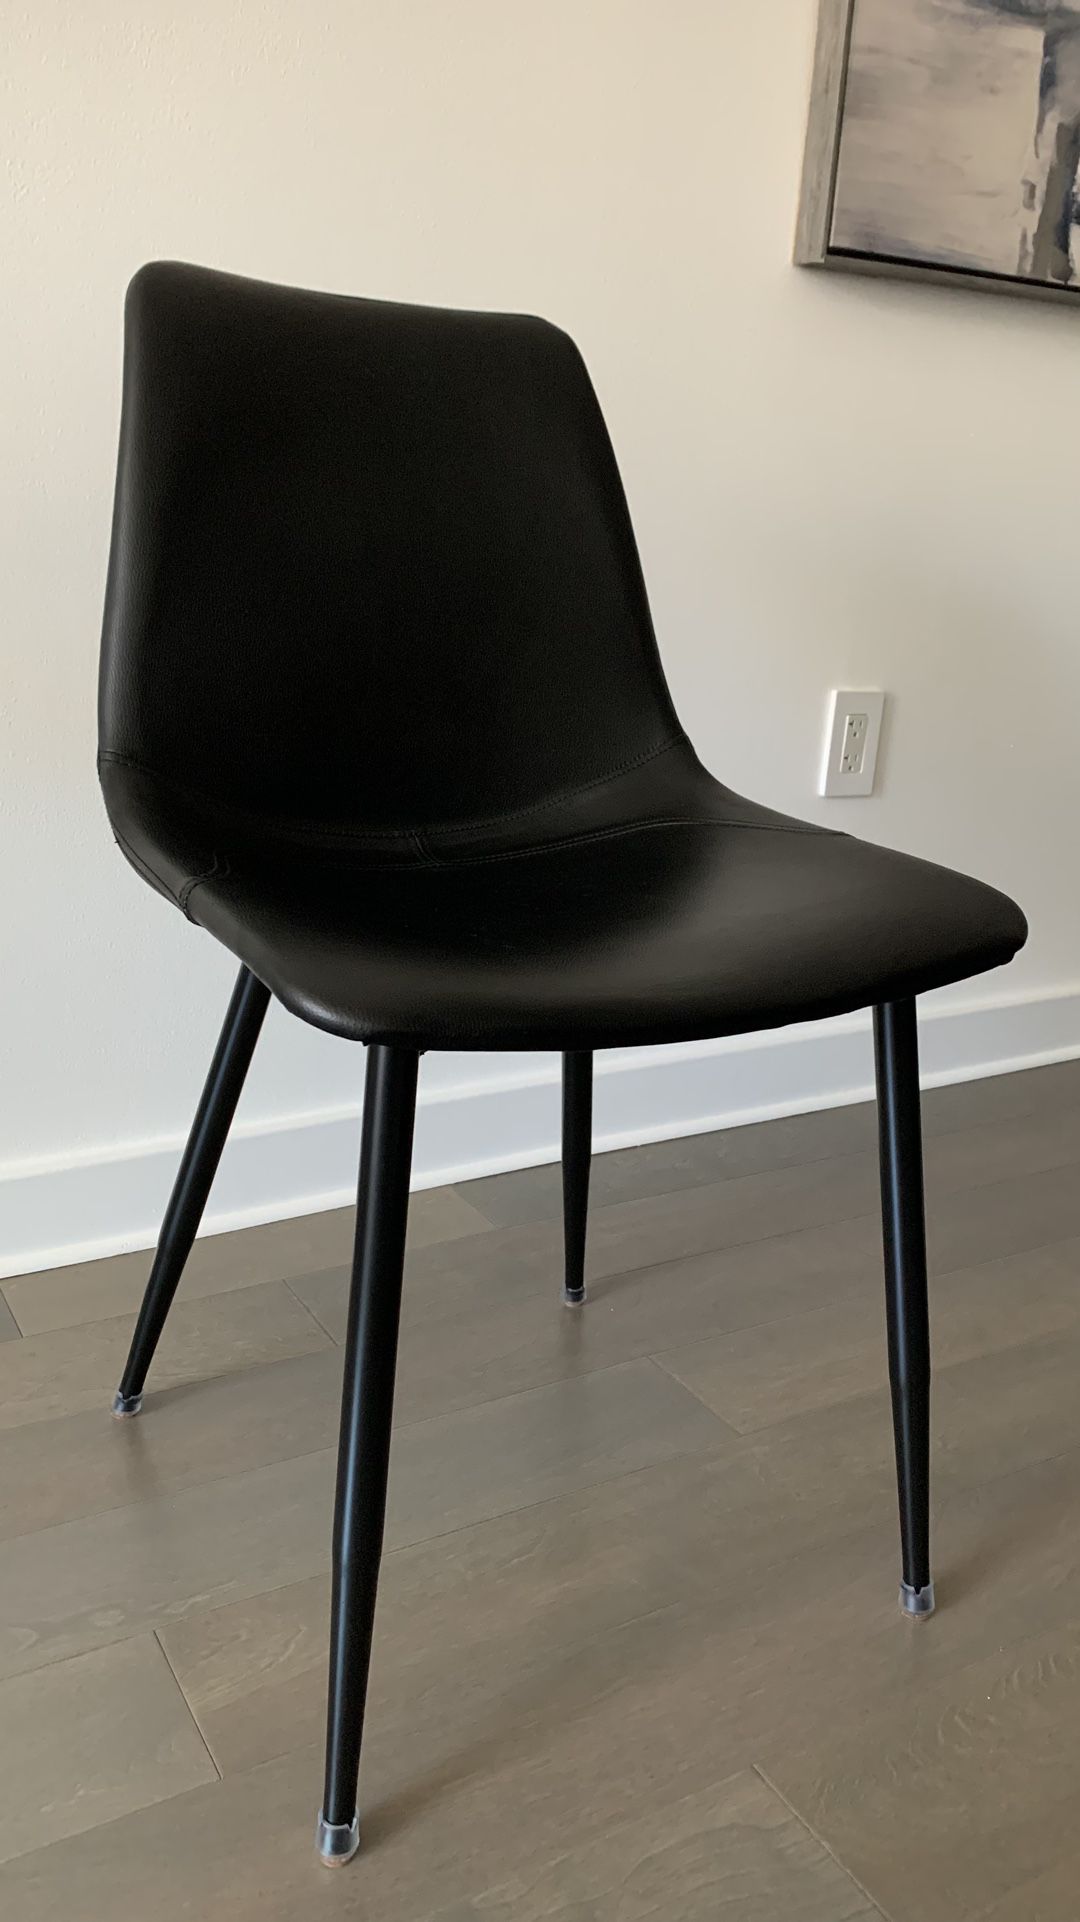 Black Faux Leather Chair